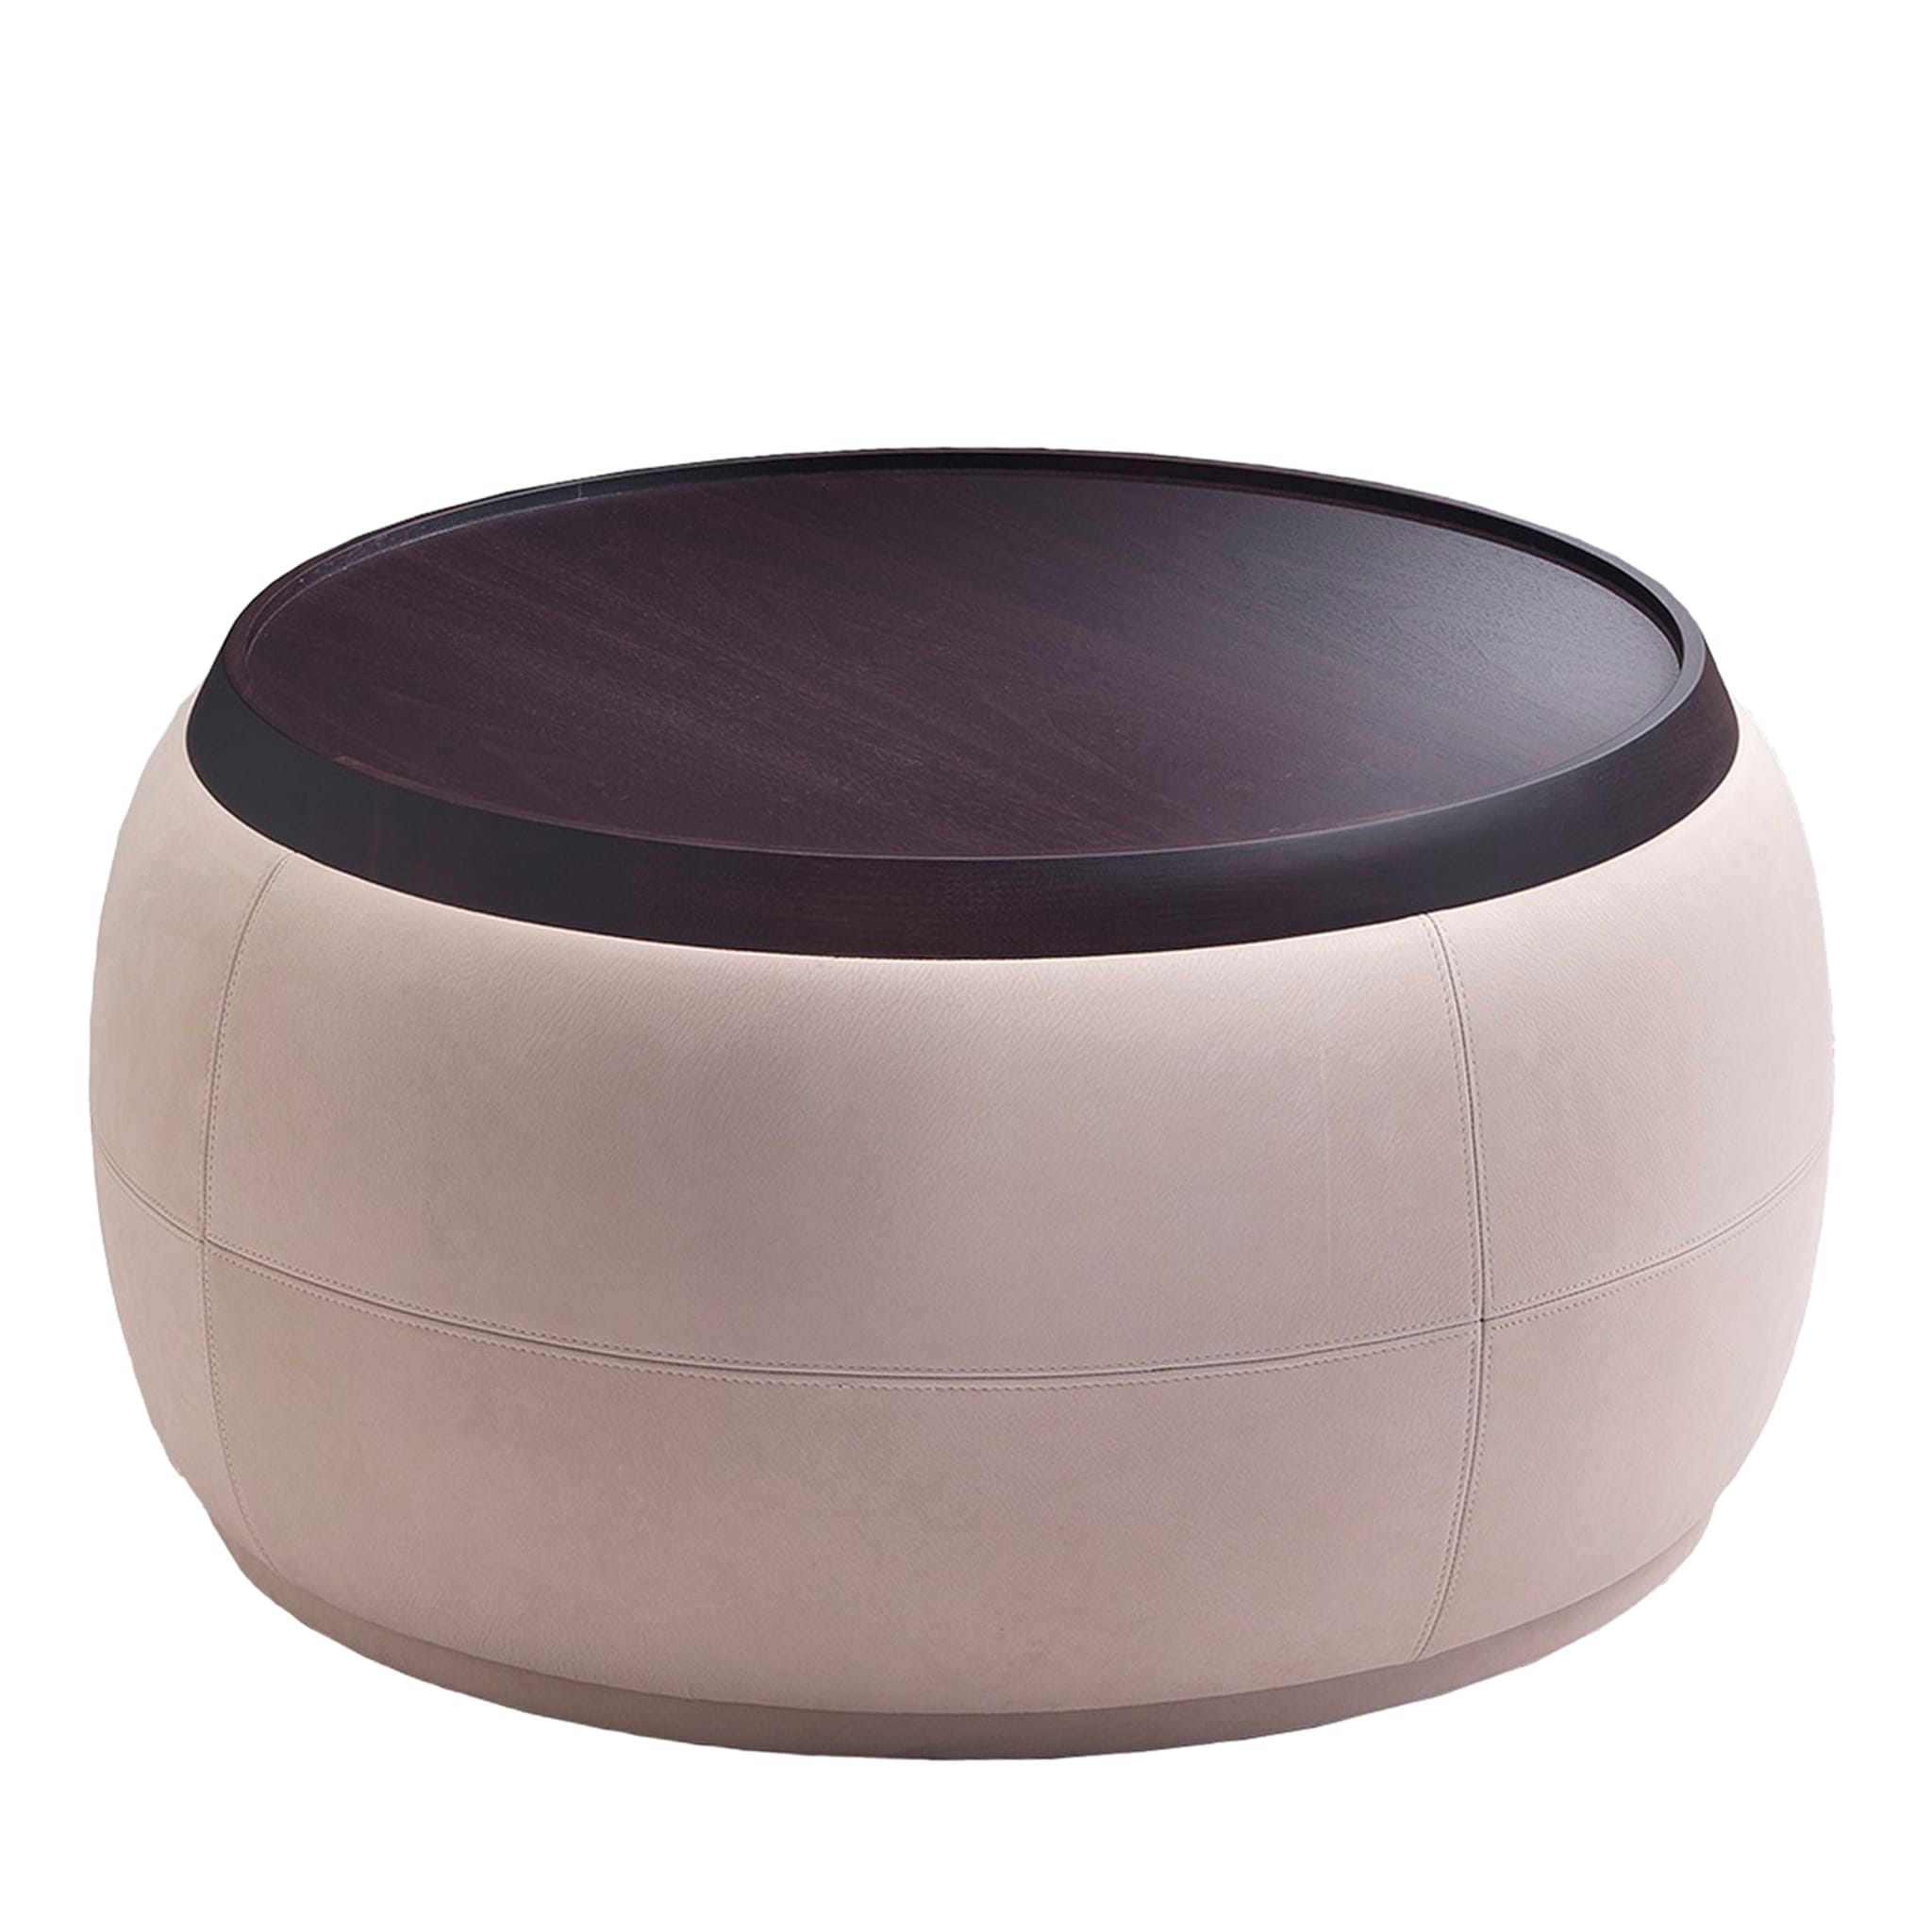 Round Upholstered Pouf in Canaletto Walnut #2 - Main view